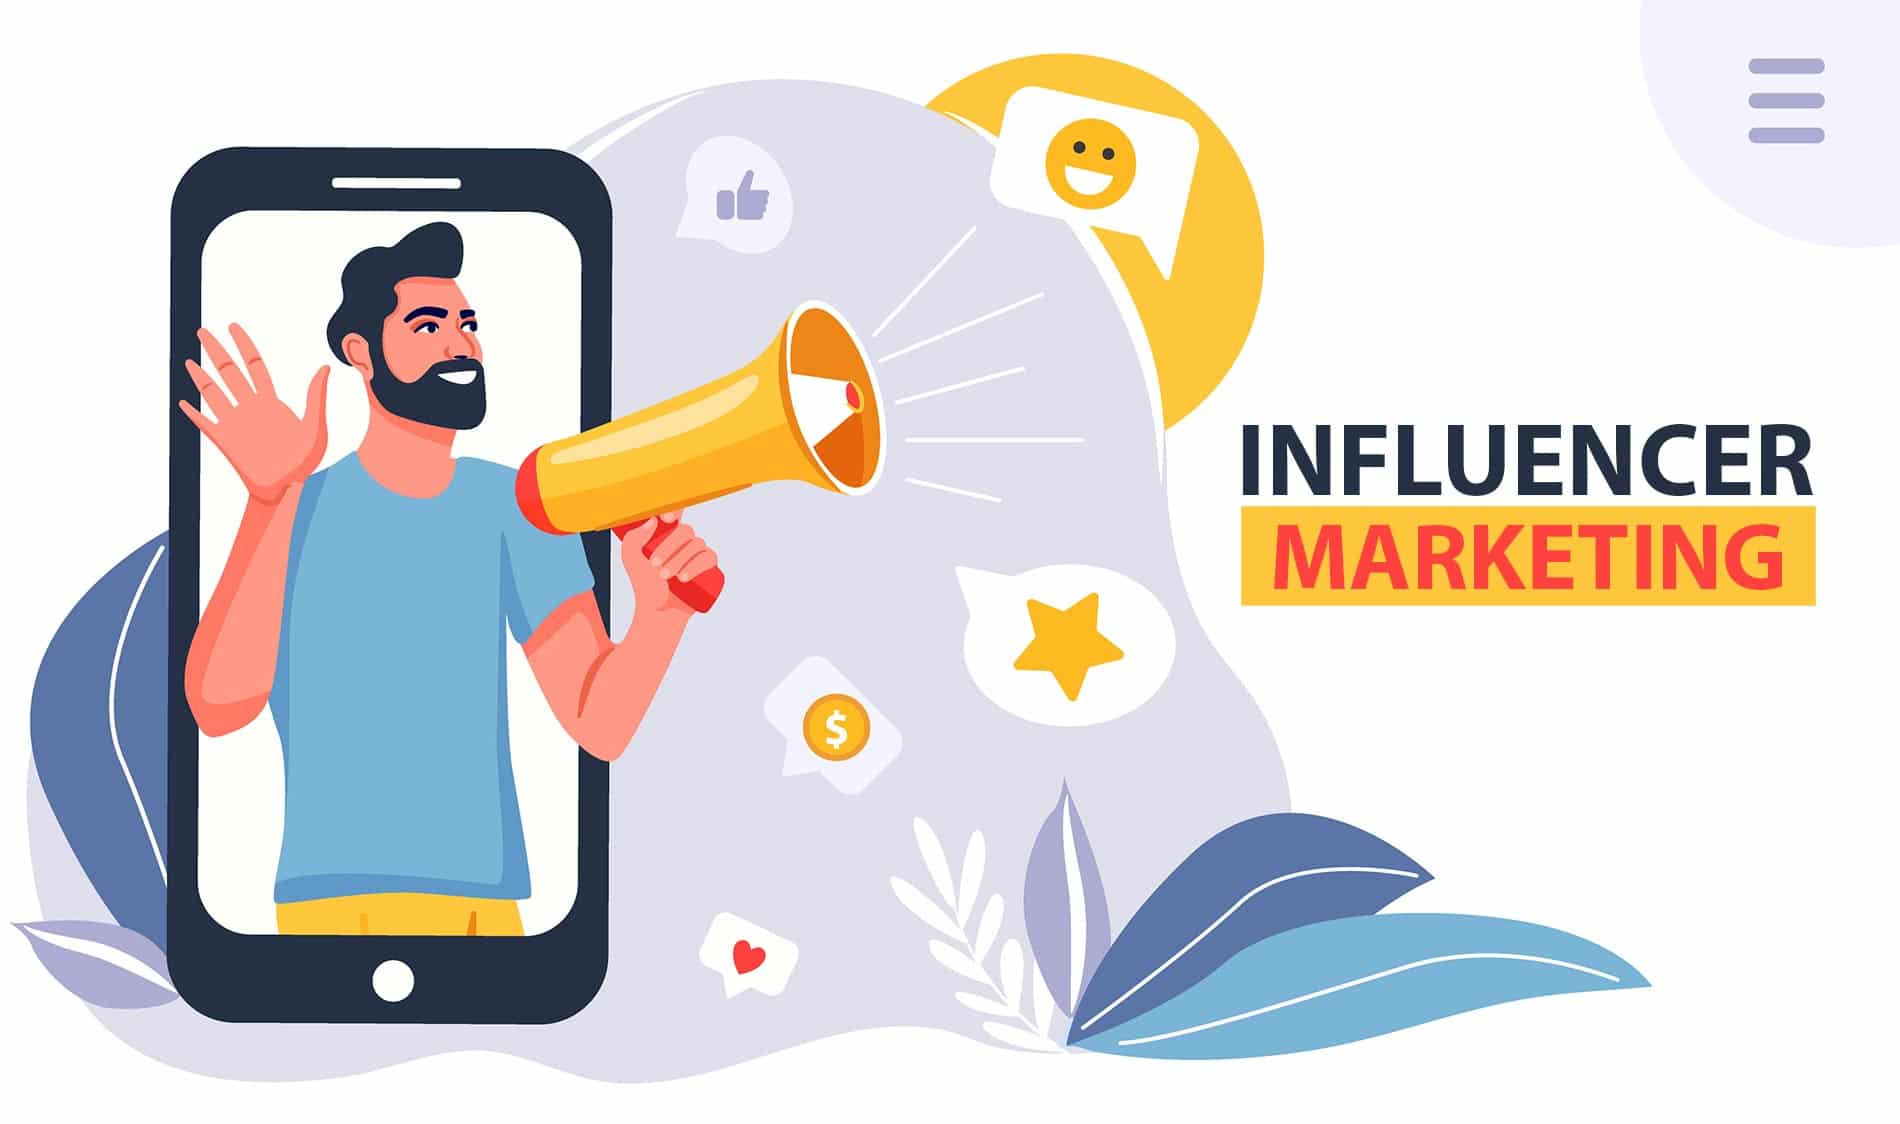 Heepsy’s Influence Atlas: Mapping the Influencer Marketing Landscape